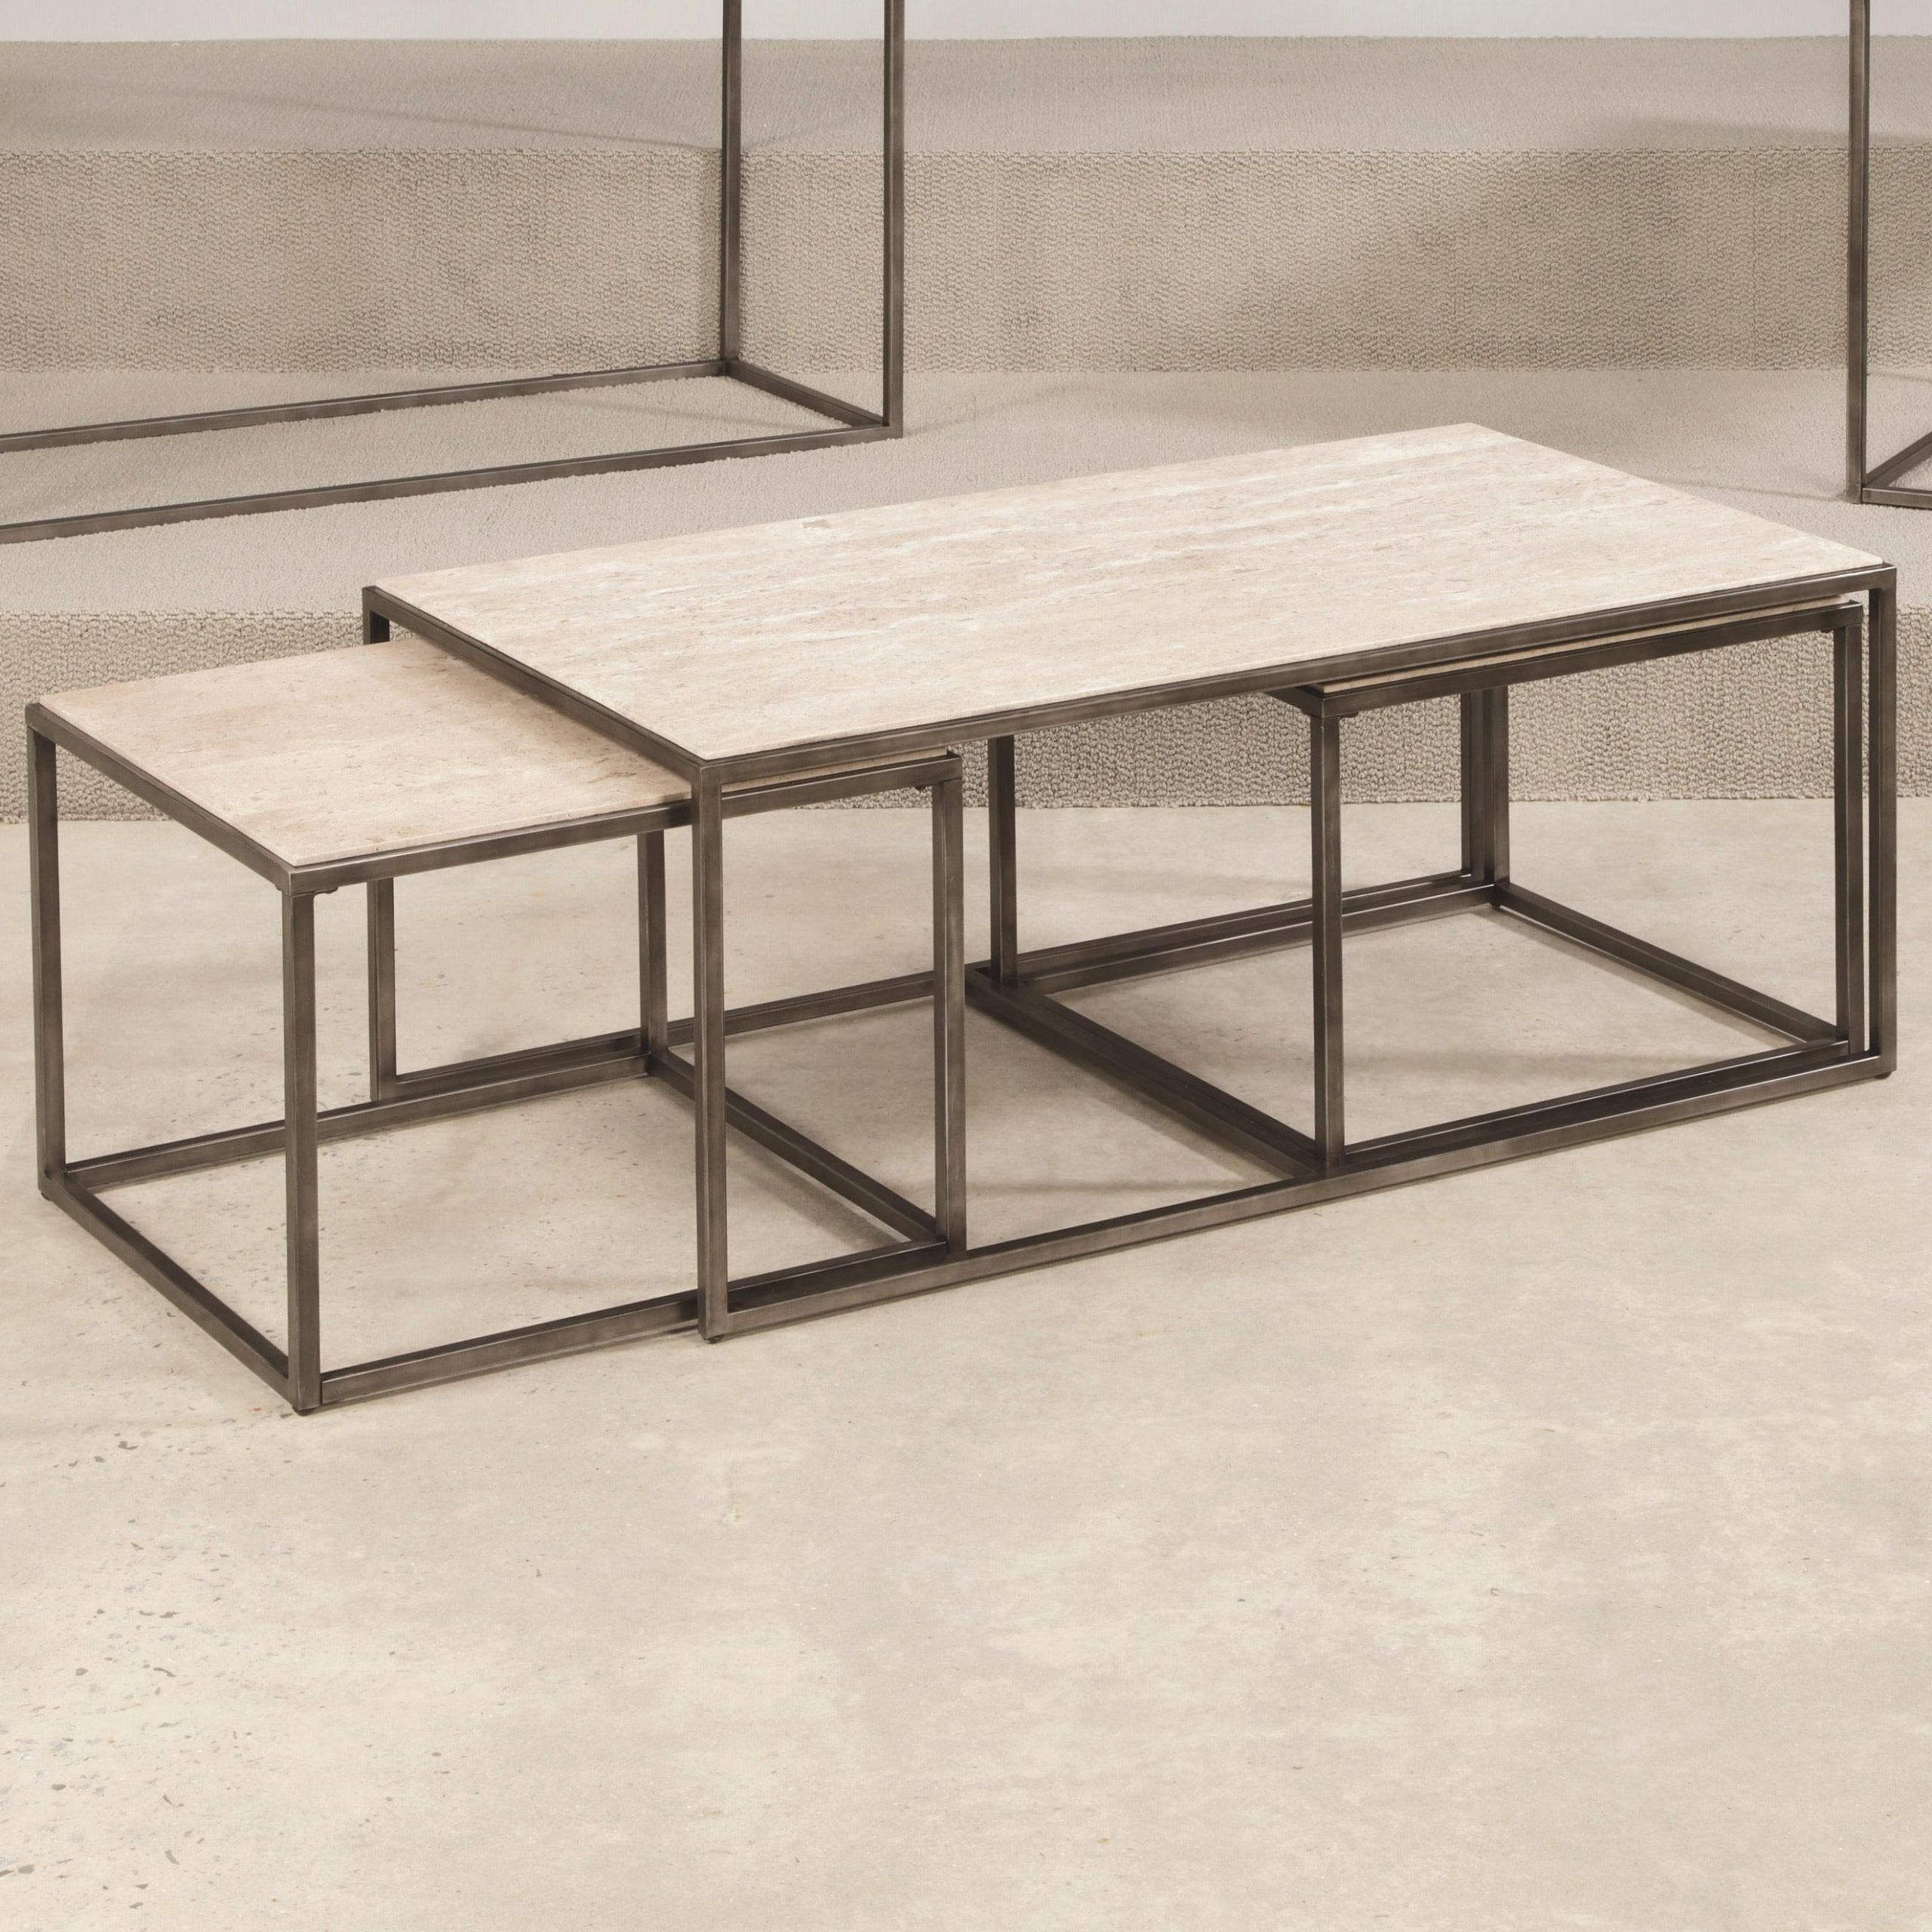 Hammary Modern Basics Rectangular Cocktail Table With For Widely Used Nesting Cocktail Tables (View 13 of 20)